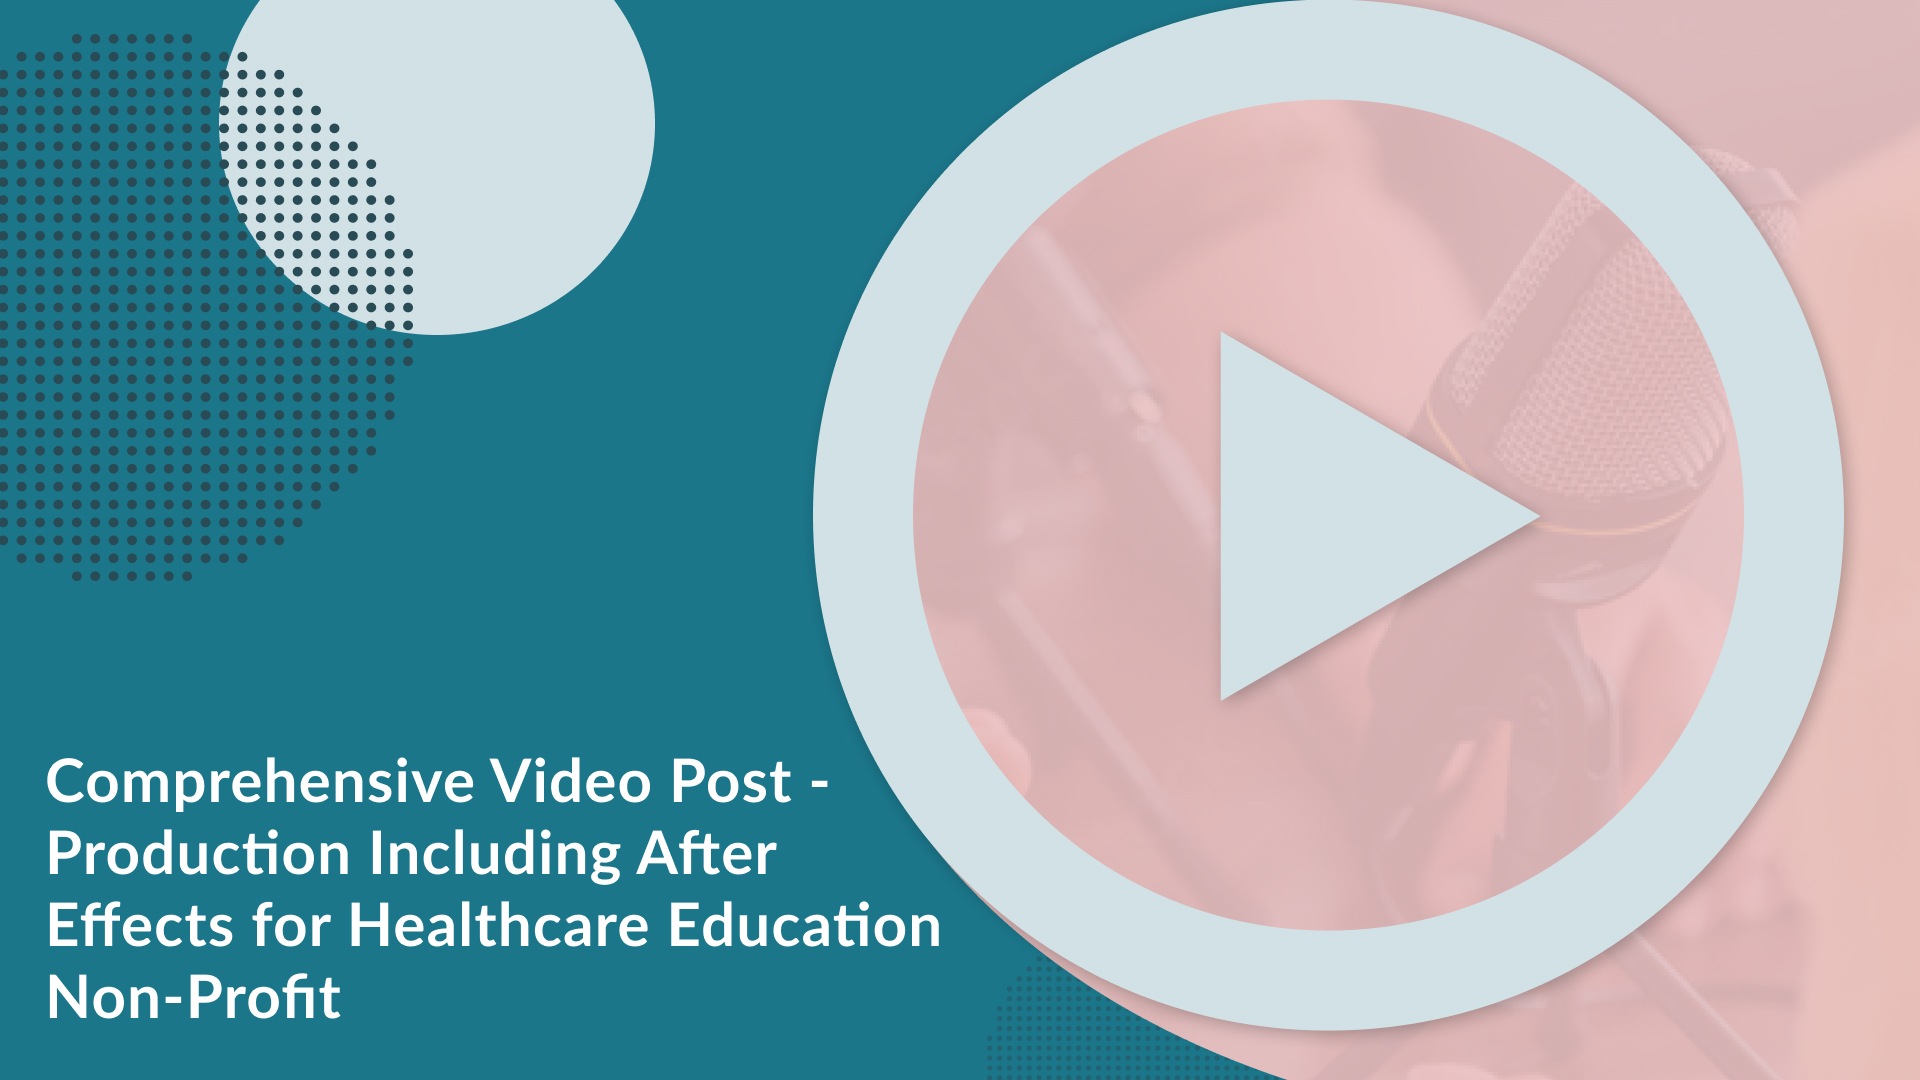 Text reads, "Comprehensive Video Post - Production Including After Effects for Healthcare Education Non-Profit."